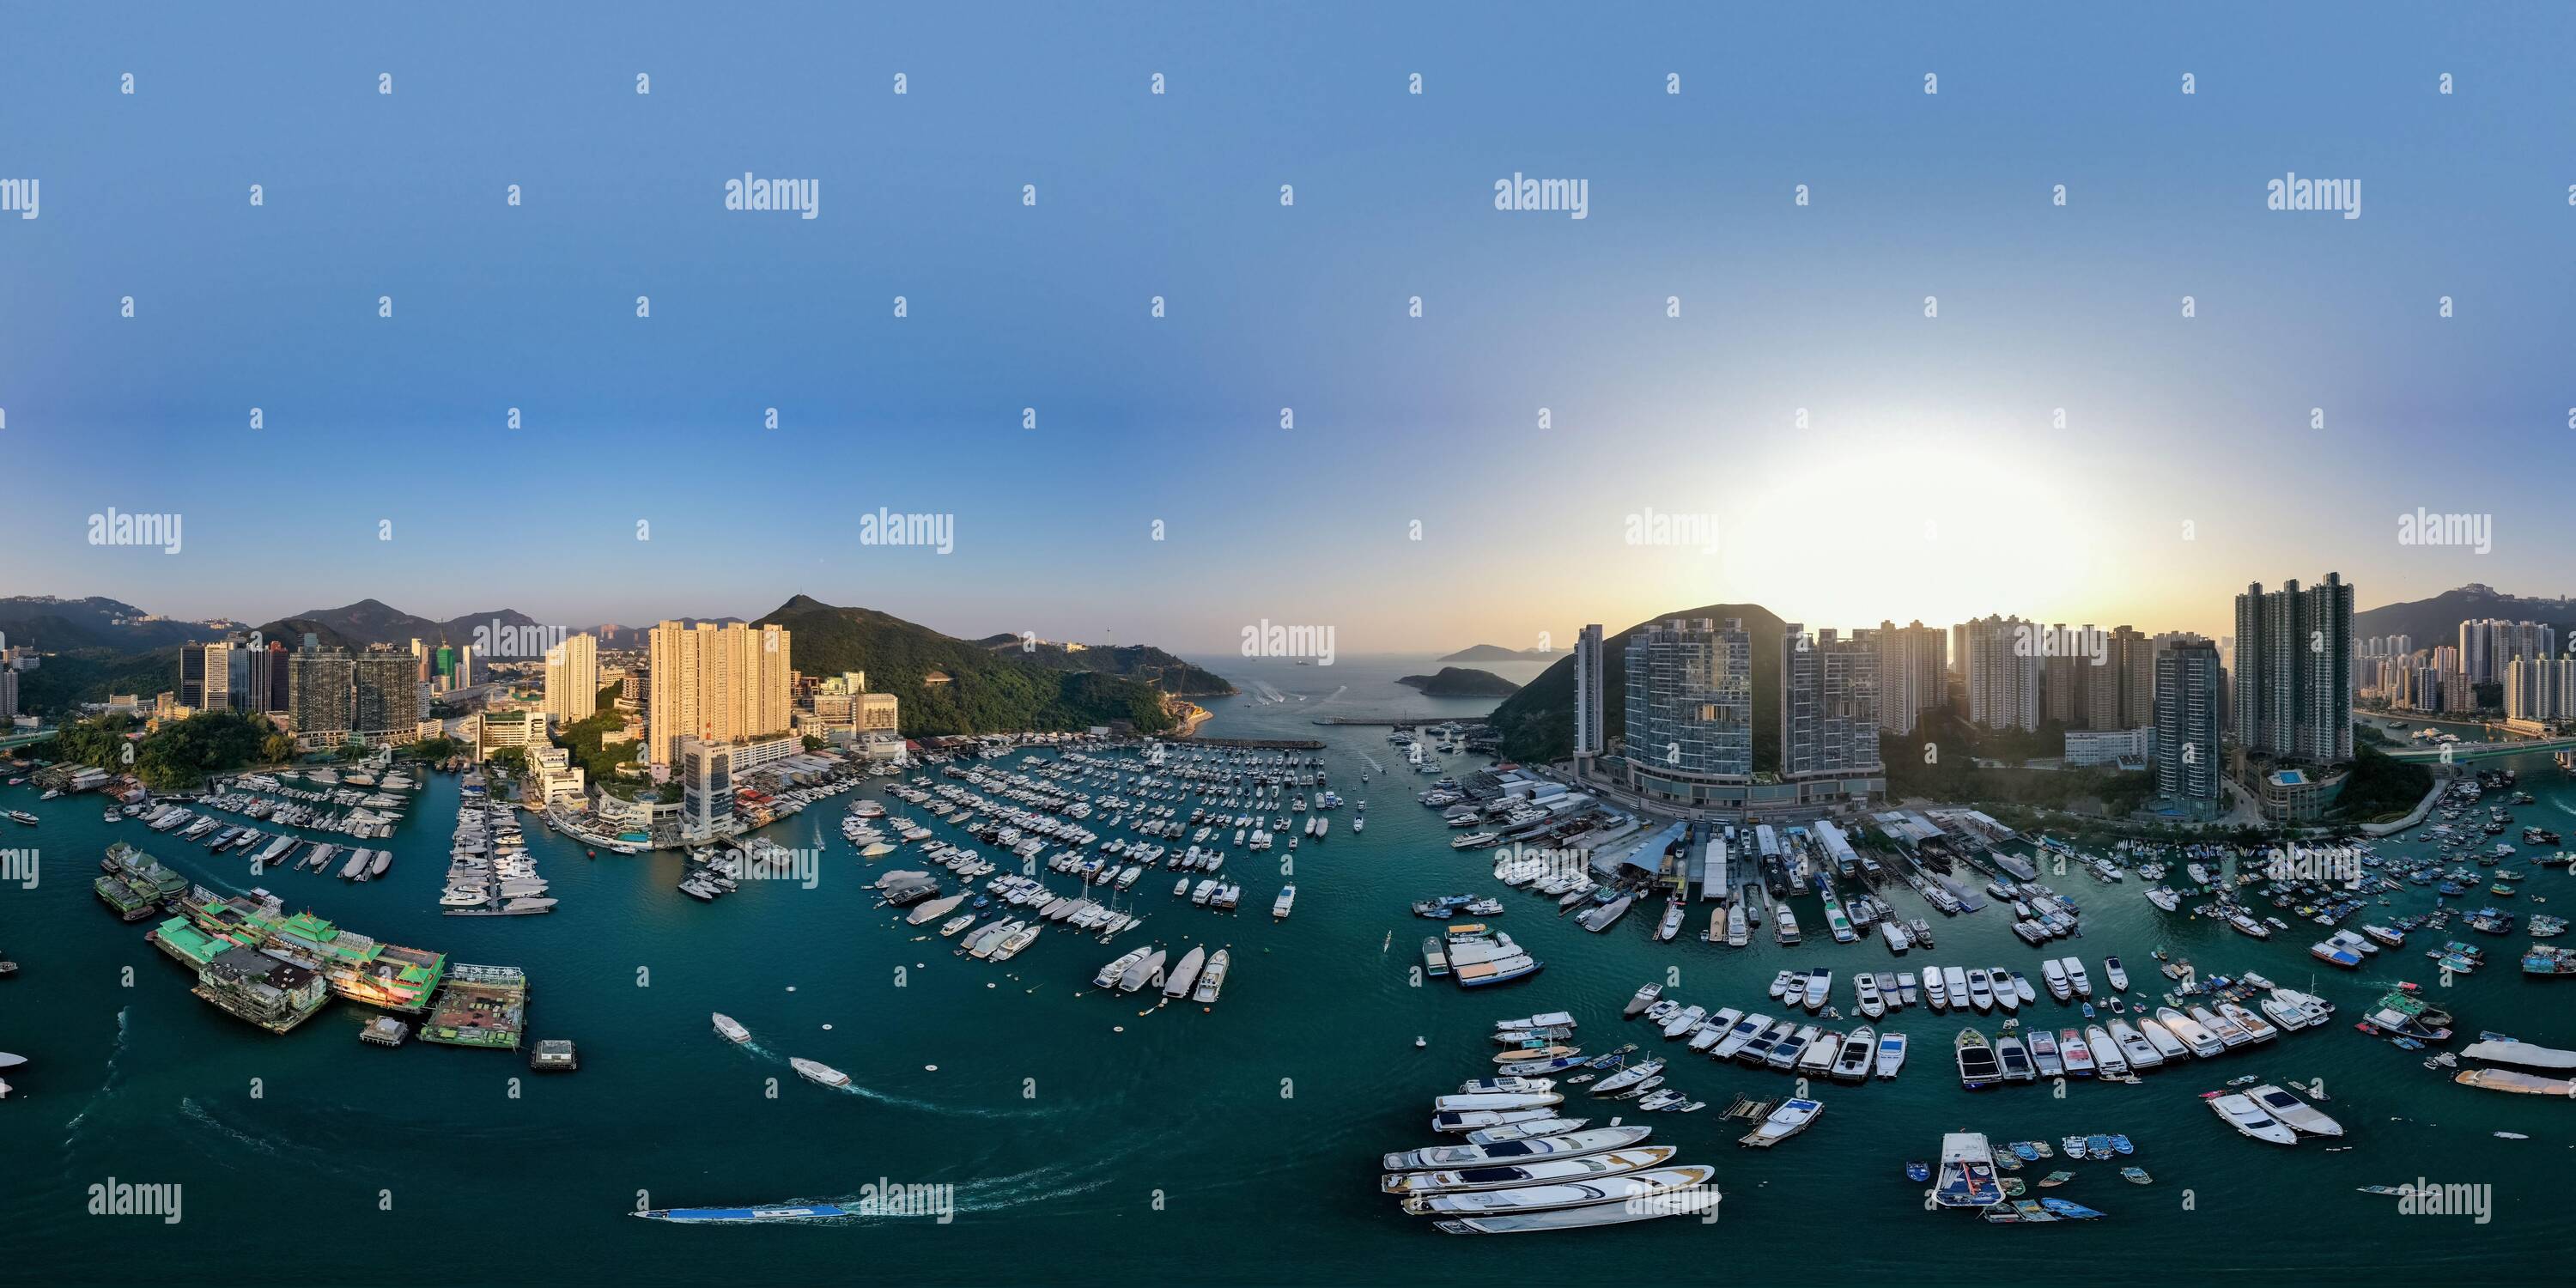 360 degree panoramic view of Aerial view of Aberdeen Typhoon Shelters and Ap Lei Chau, Hong Kong